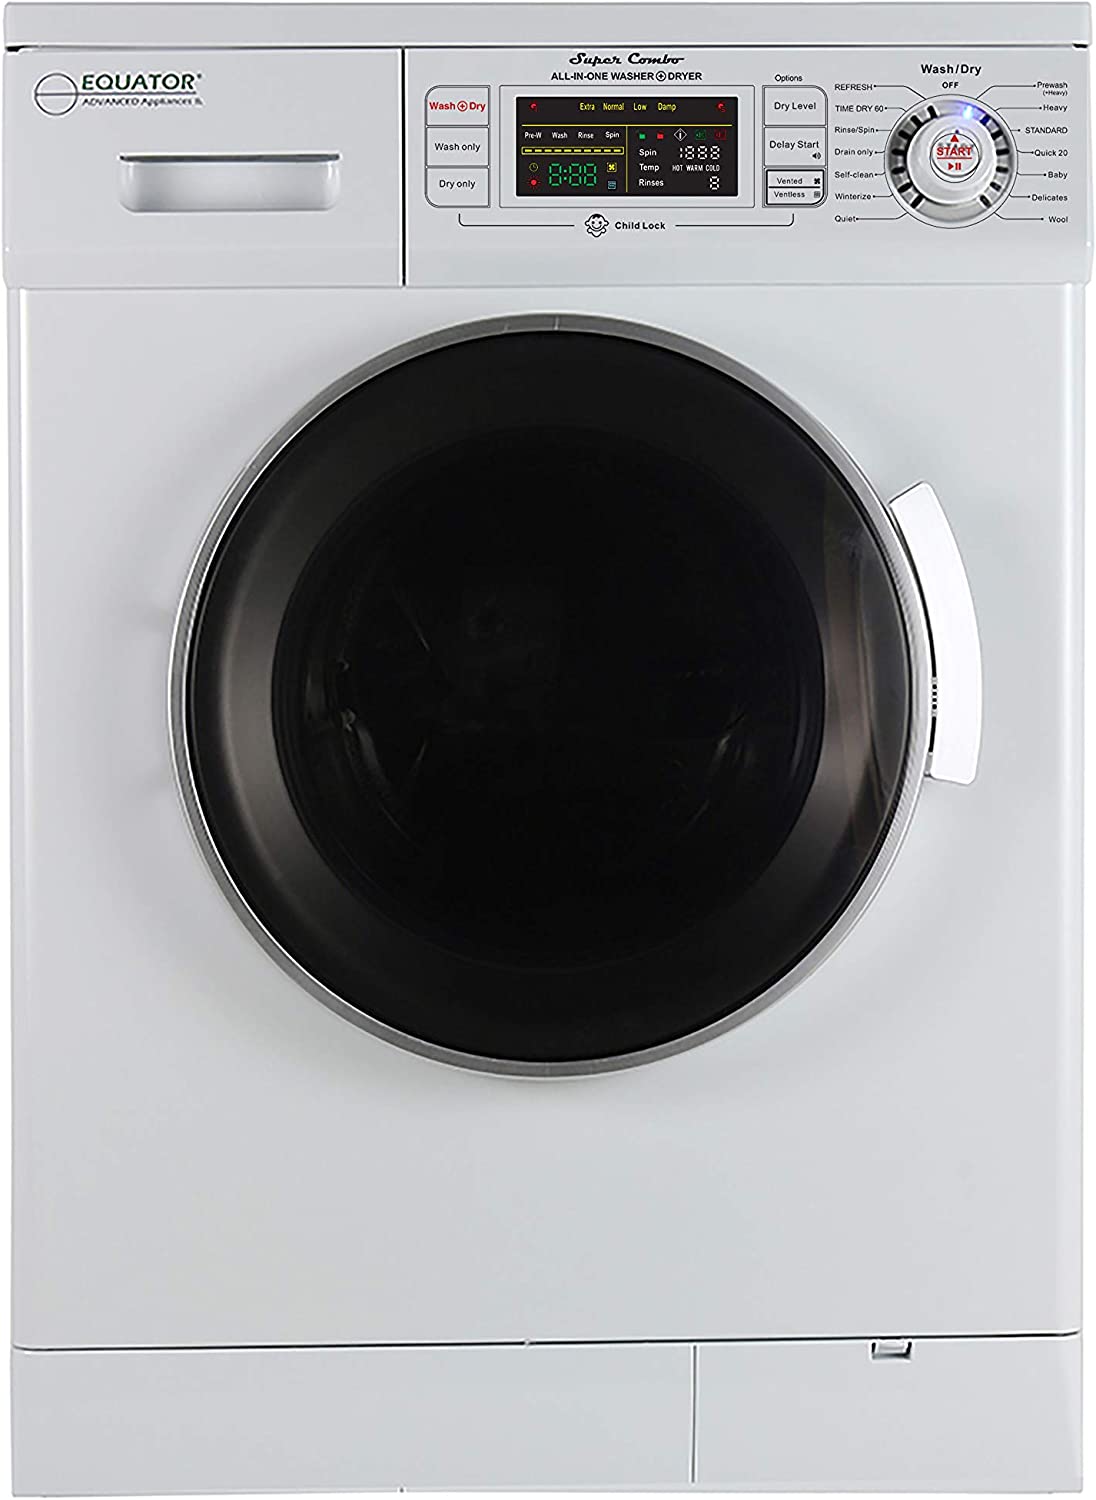 Equator Version 2 Pro 24 inch Combo Washer Dryer